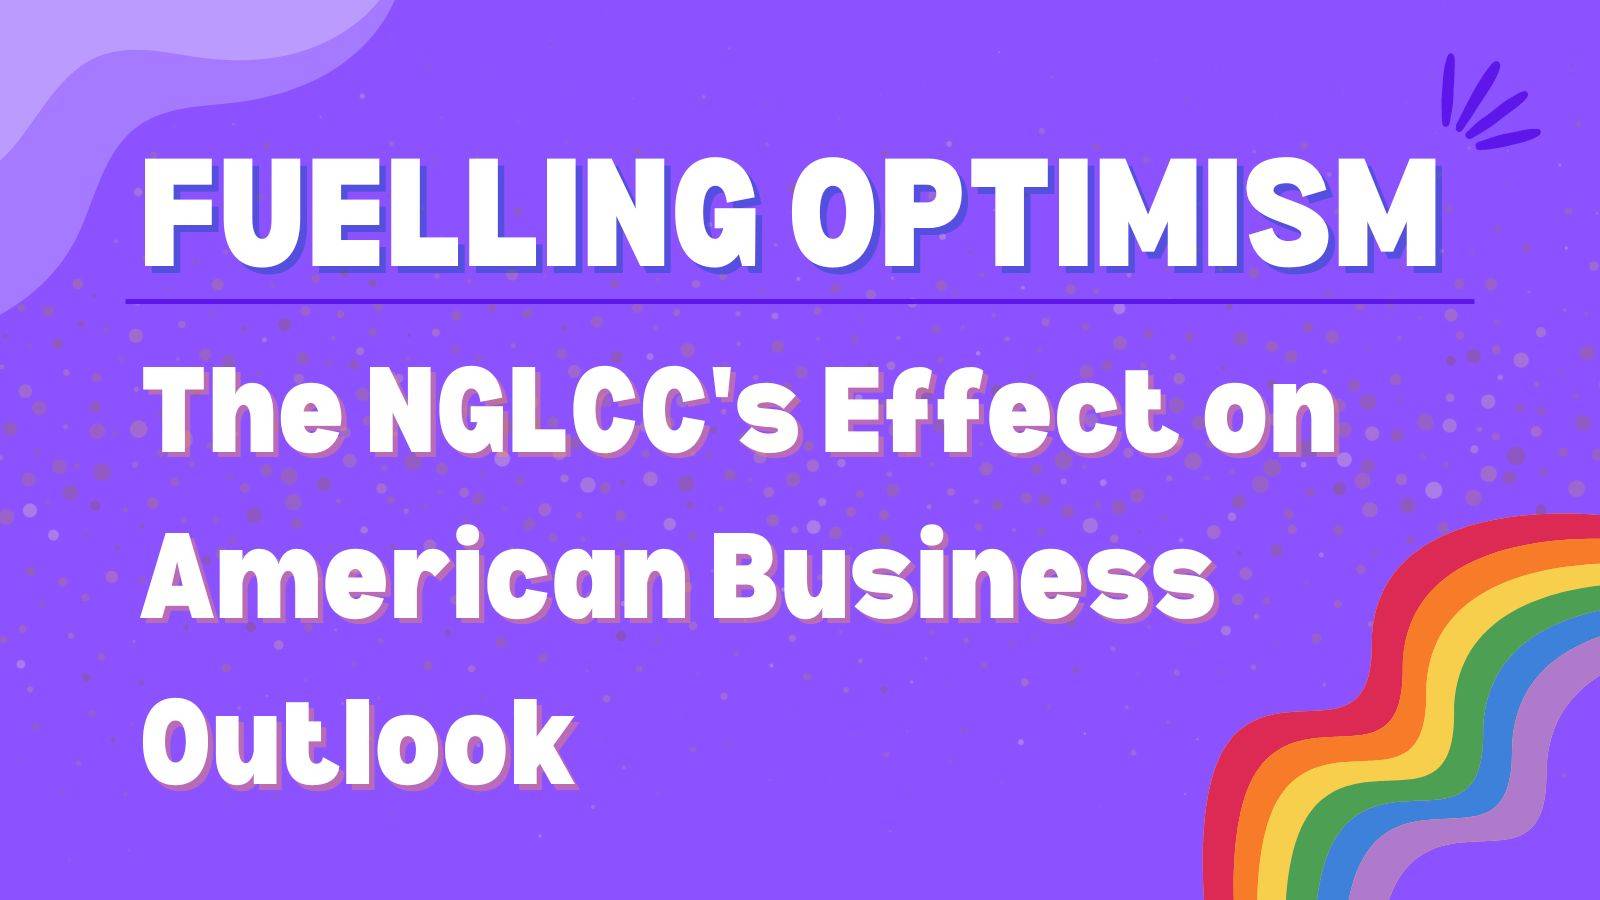 Fuelling Optimism The NGLCC's Effect on American Business Outlook